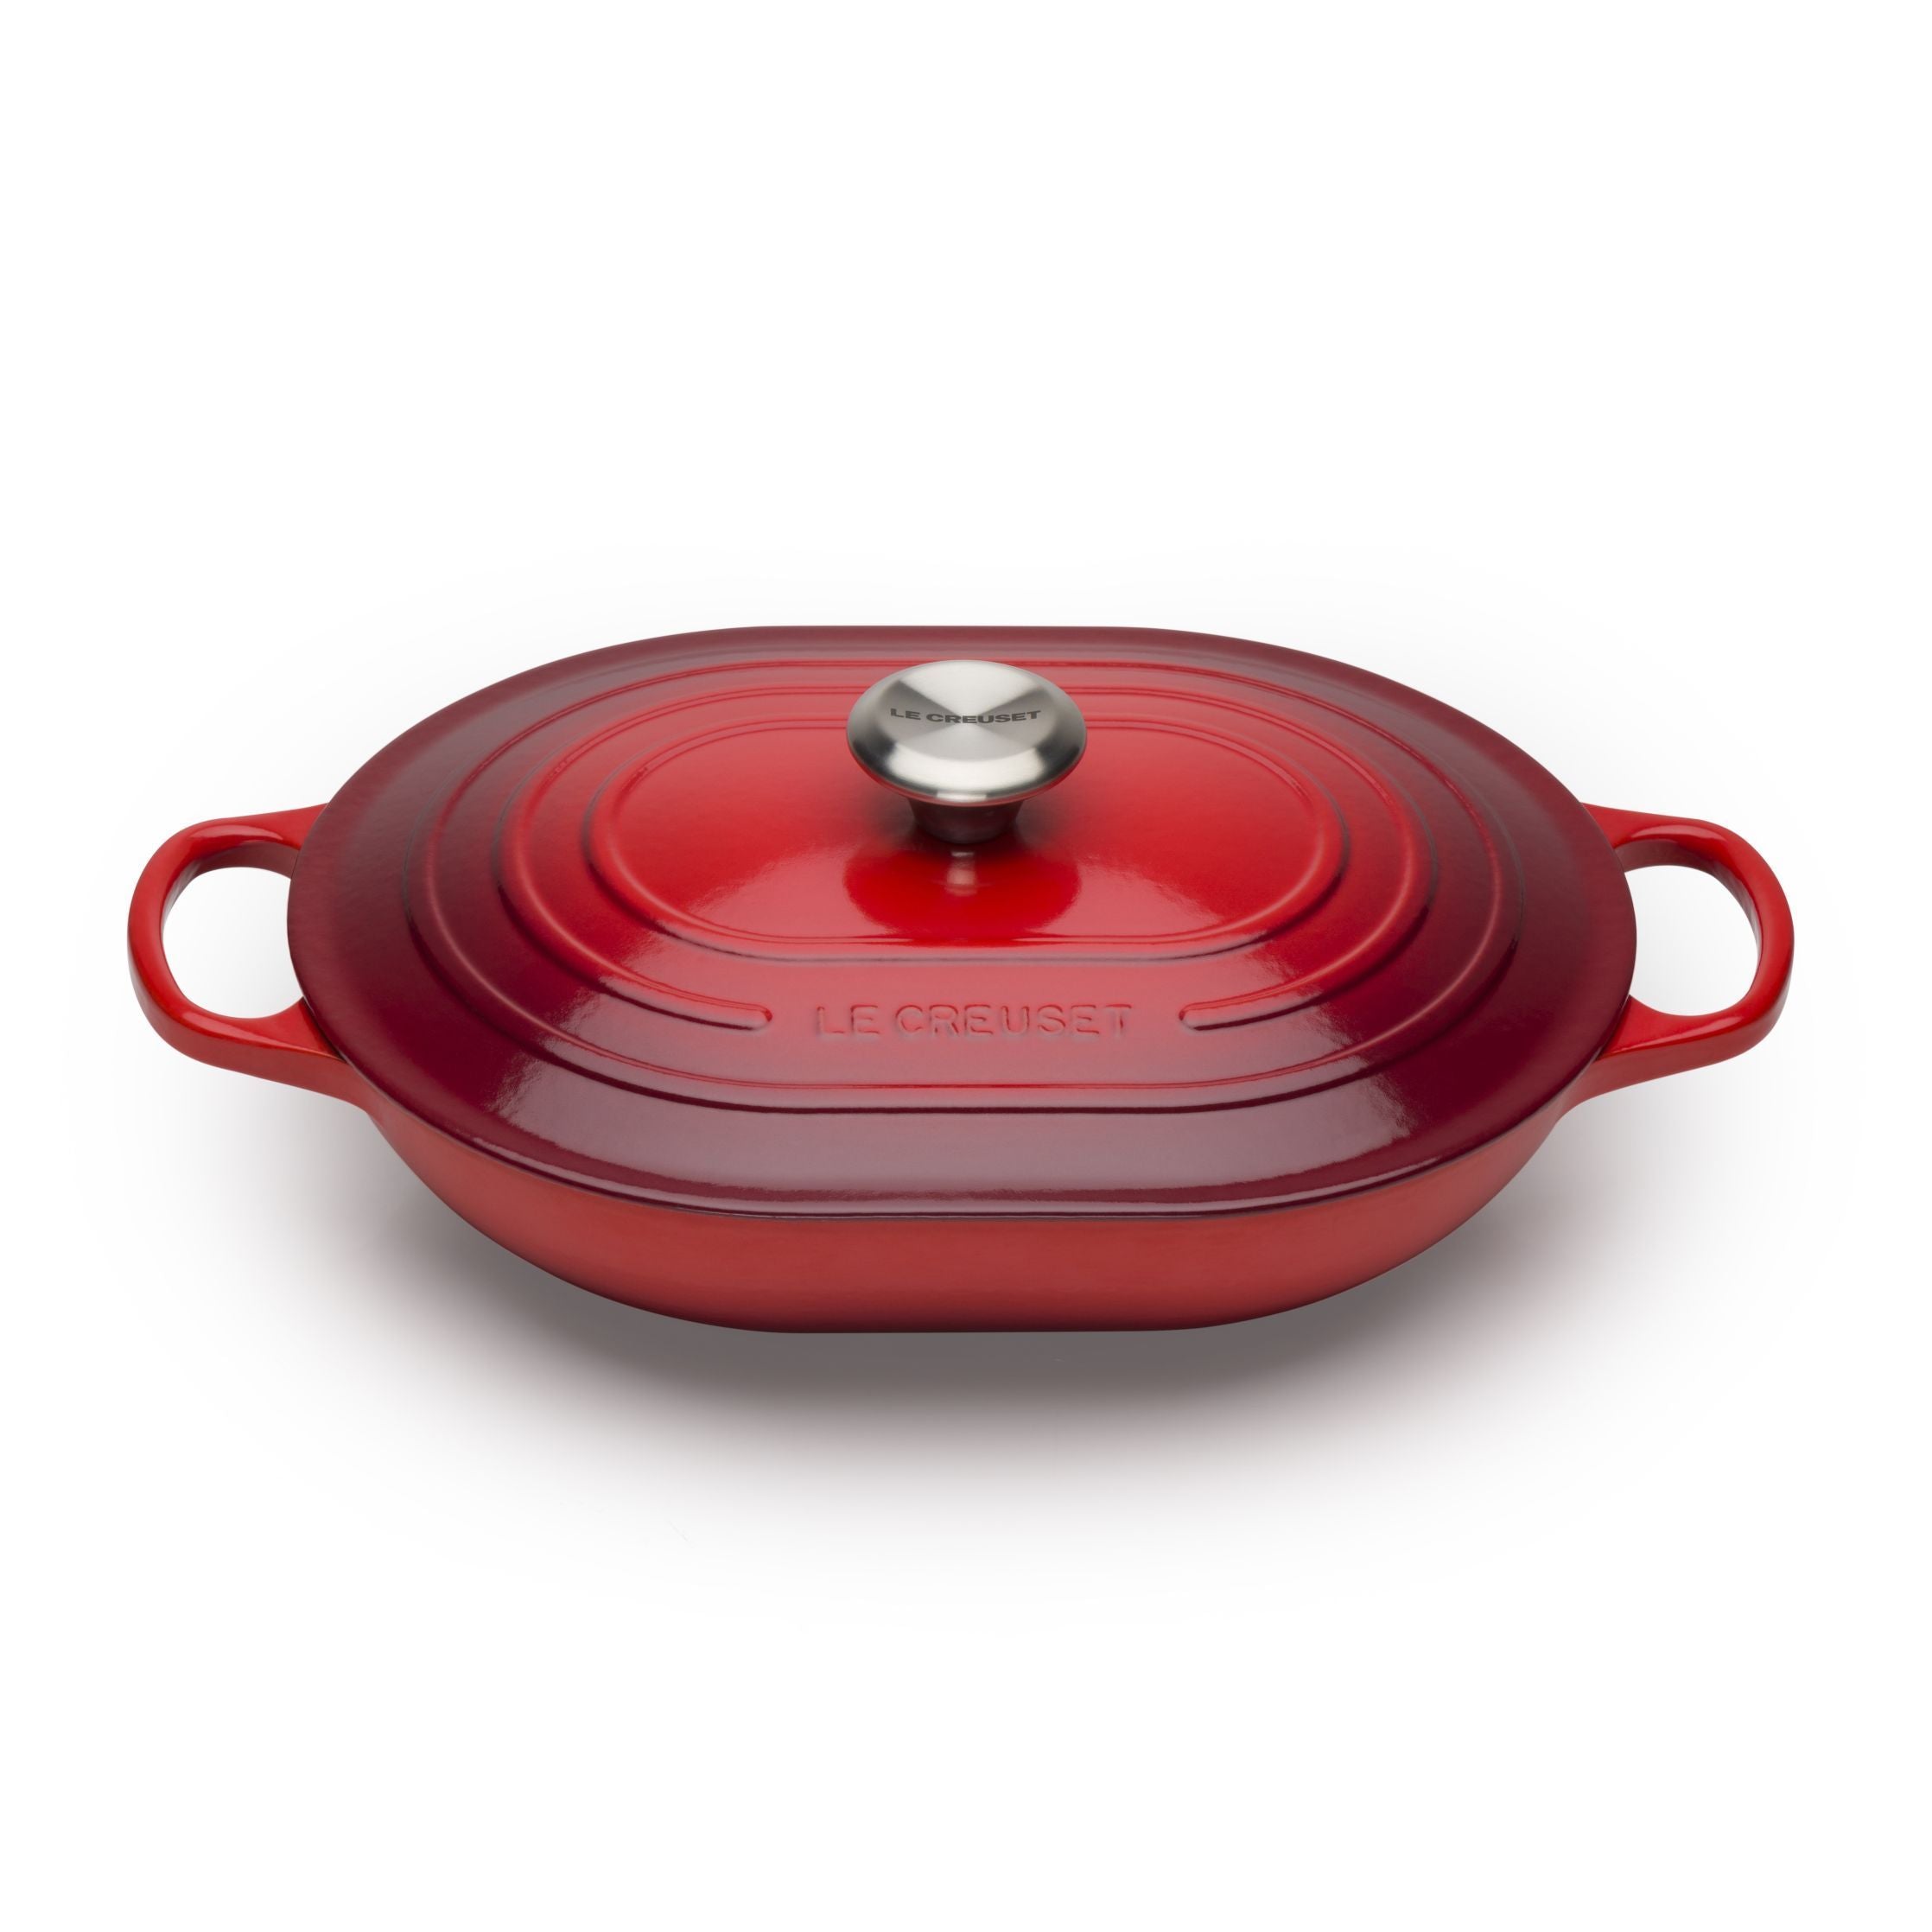 Le Creuset Nature Langce Roaster 3,4 L, Cherry Red